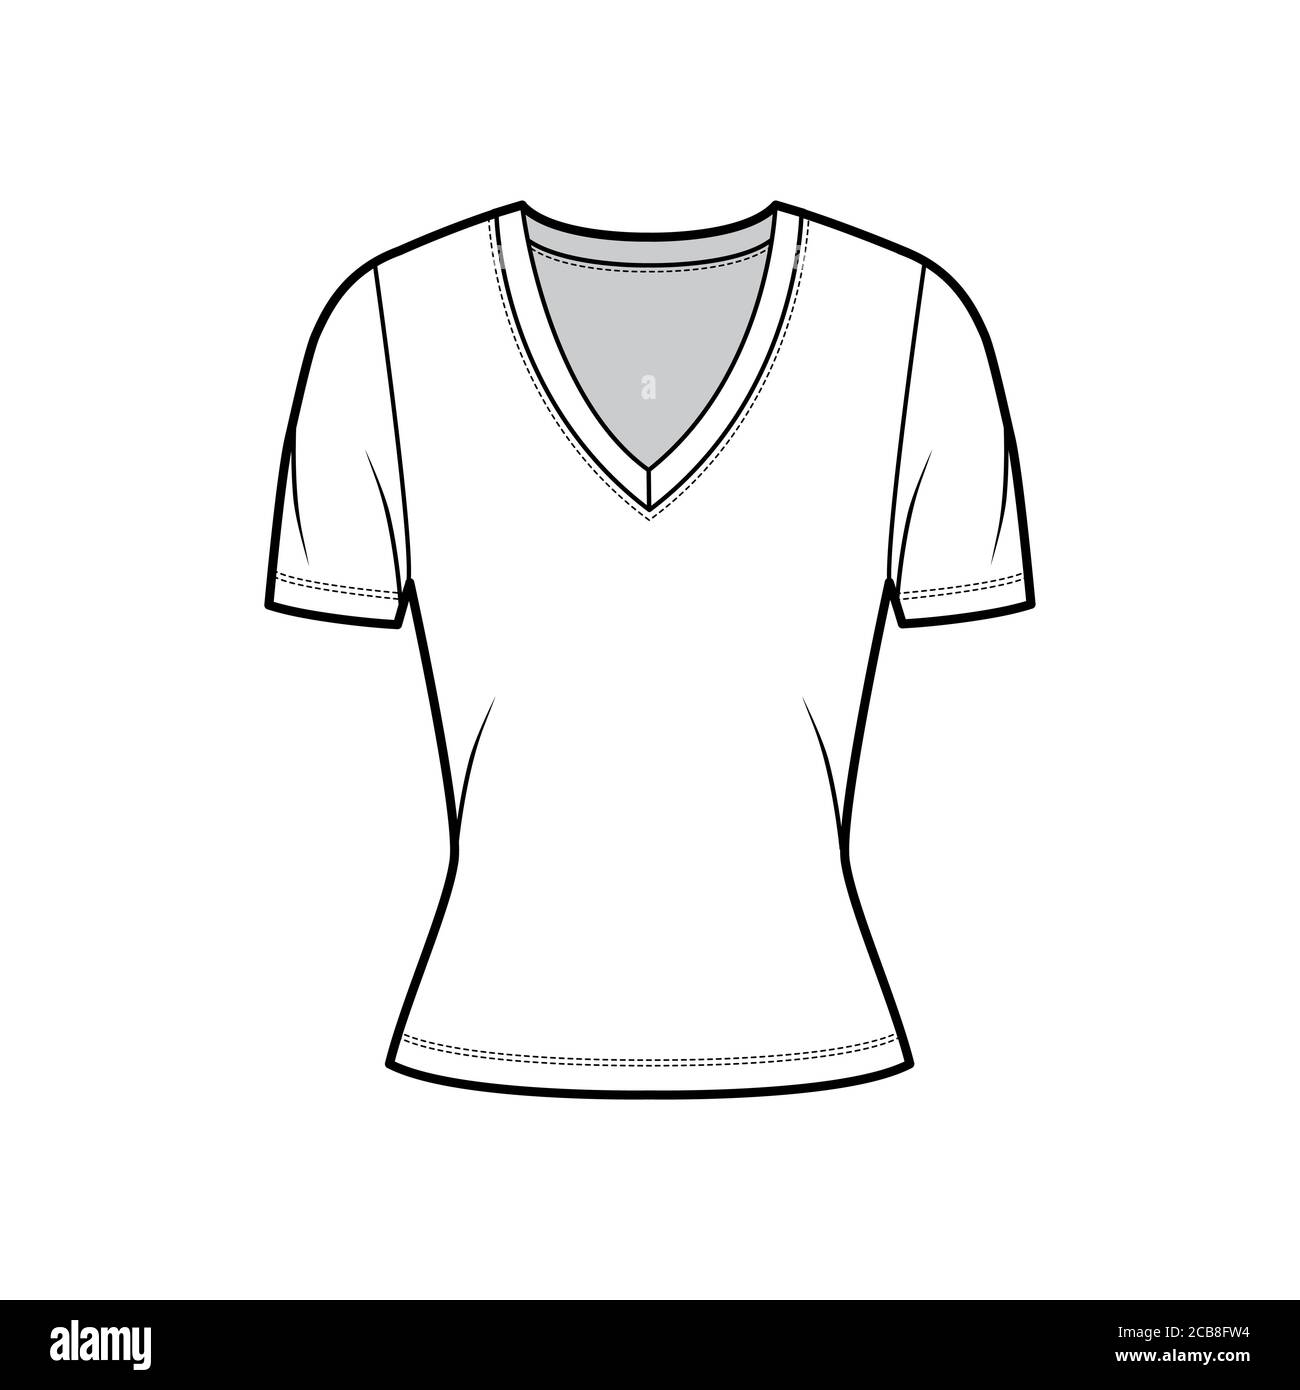 https://c8.alamy.com/comp/2CB8FW4/deep-v-neck-jersey-t-shirt-technical-fashion-illustration-with-short-sleeves-close-fitting-shape-flat-top-apparel-template-front-white-color-women-men-unisex-outfit-cad-mockup-2CB8FW4.jpg